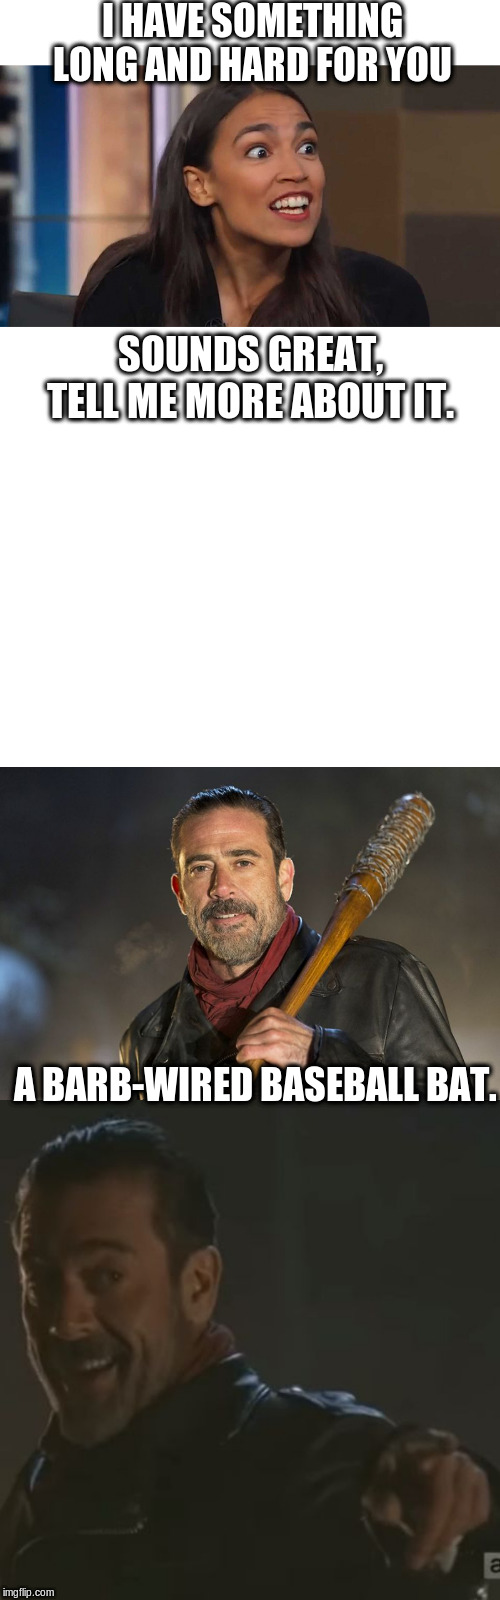 Something long and hard for you | I HAVE SOMETHING LONG AND HARD FOR YOU; SOUNDS GREAT,
TELL ME MORE ABOUT IT. A BARB-WIRED BASEBALL BAT. | image tagged in blank white template,negan i get it,negan,lizard woman aoc | made w/ Imgflip meme maker